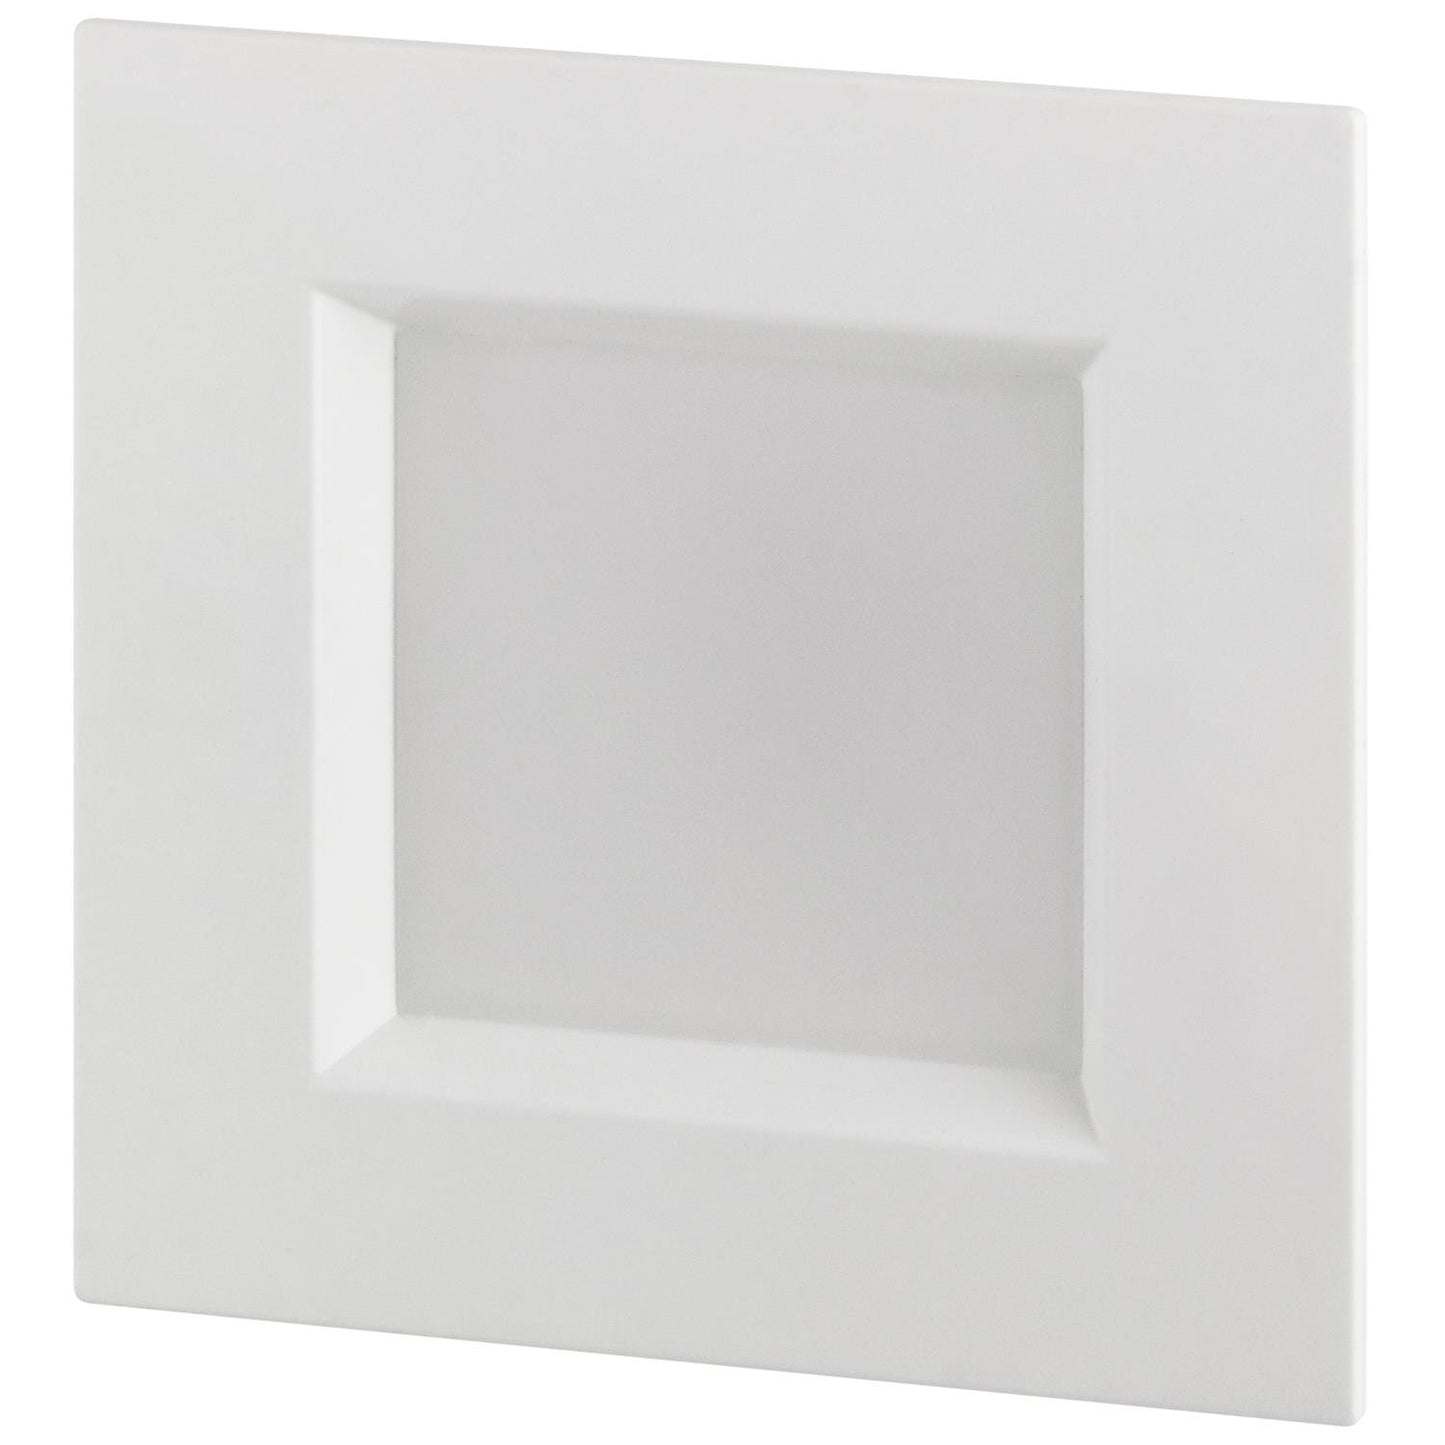 Sunlite 89278-SU LED Retrofit 4-Inch Square Recessed Downlight, Dimmable, Medium Base (E26), 10 Watts, 40K - Cool White 1 Pack